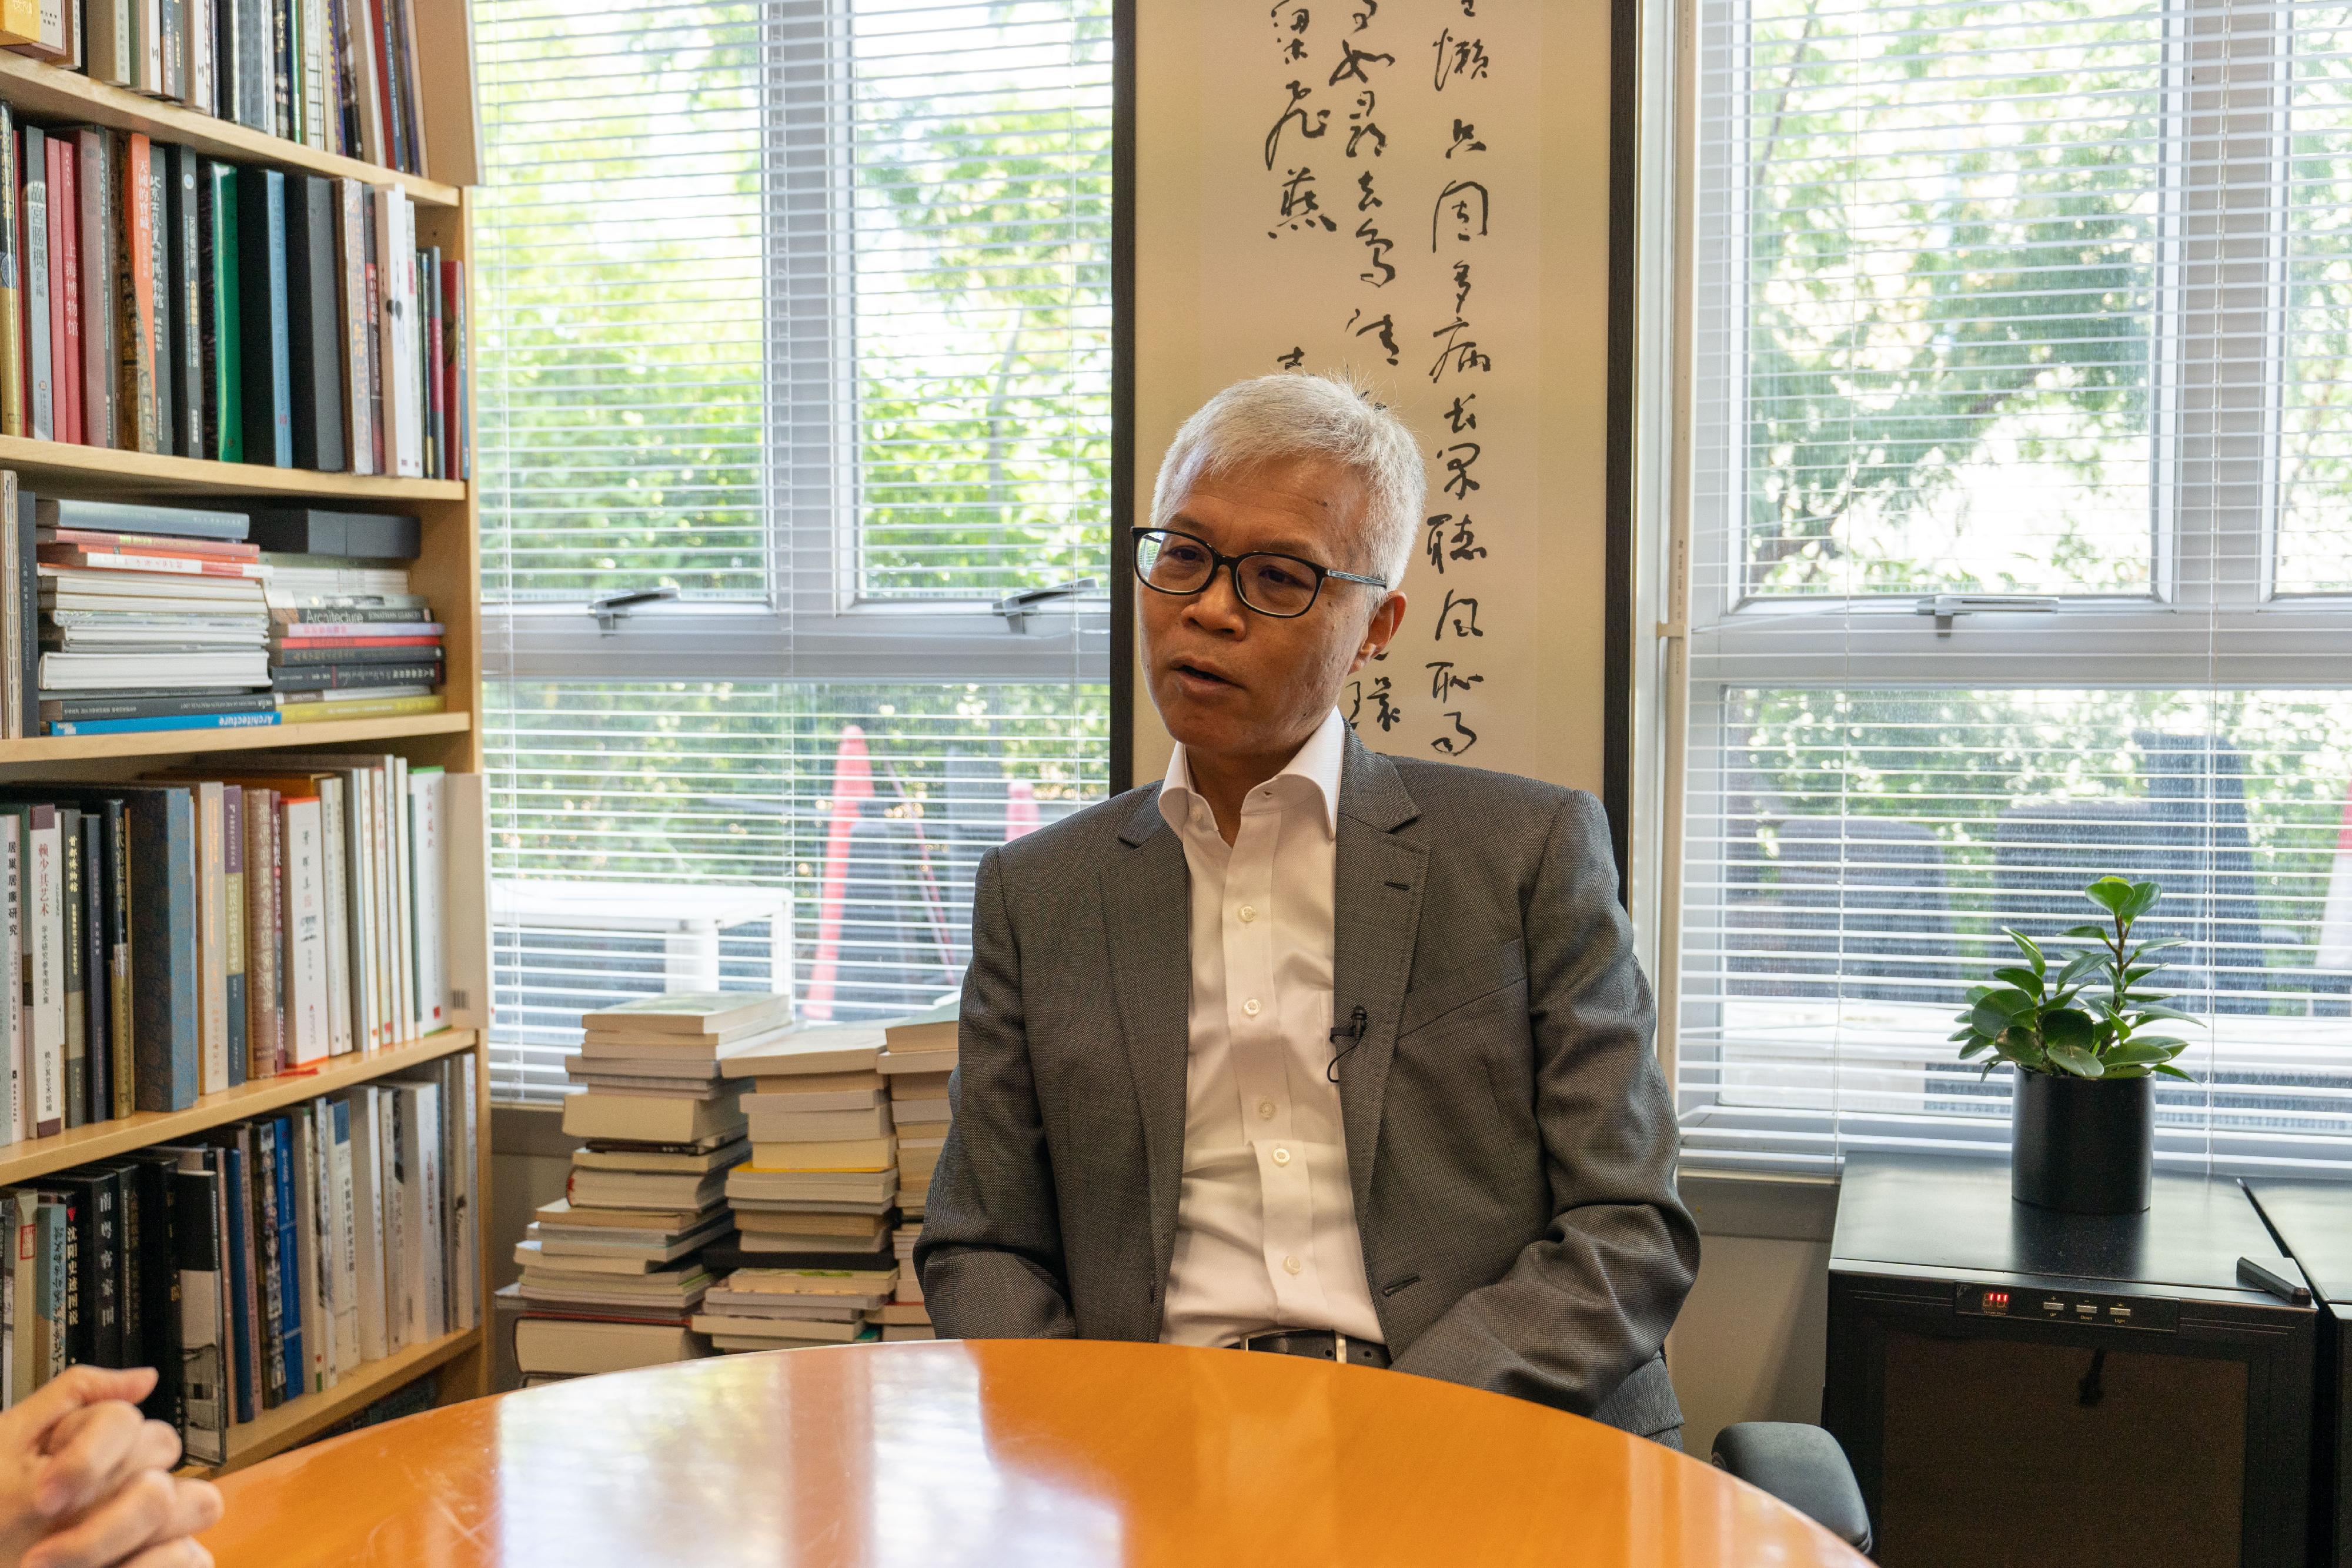 A new book, "Our Yau Tsim Mong Stories", which is jointly planned by the Yau Tsim Mong District Office and the team of Professor Lee Chi-kin of the Education University of Hong Kong, and published by Chung Hwa Book Company, has been launched. Photo shows the Museum Director of the Hong Kong Palace Museum, Dr Louis Ng, being interviewed in the book's drafting stage.